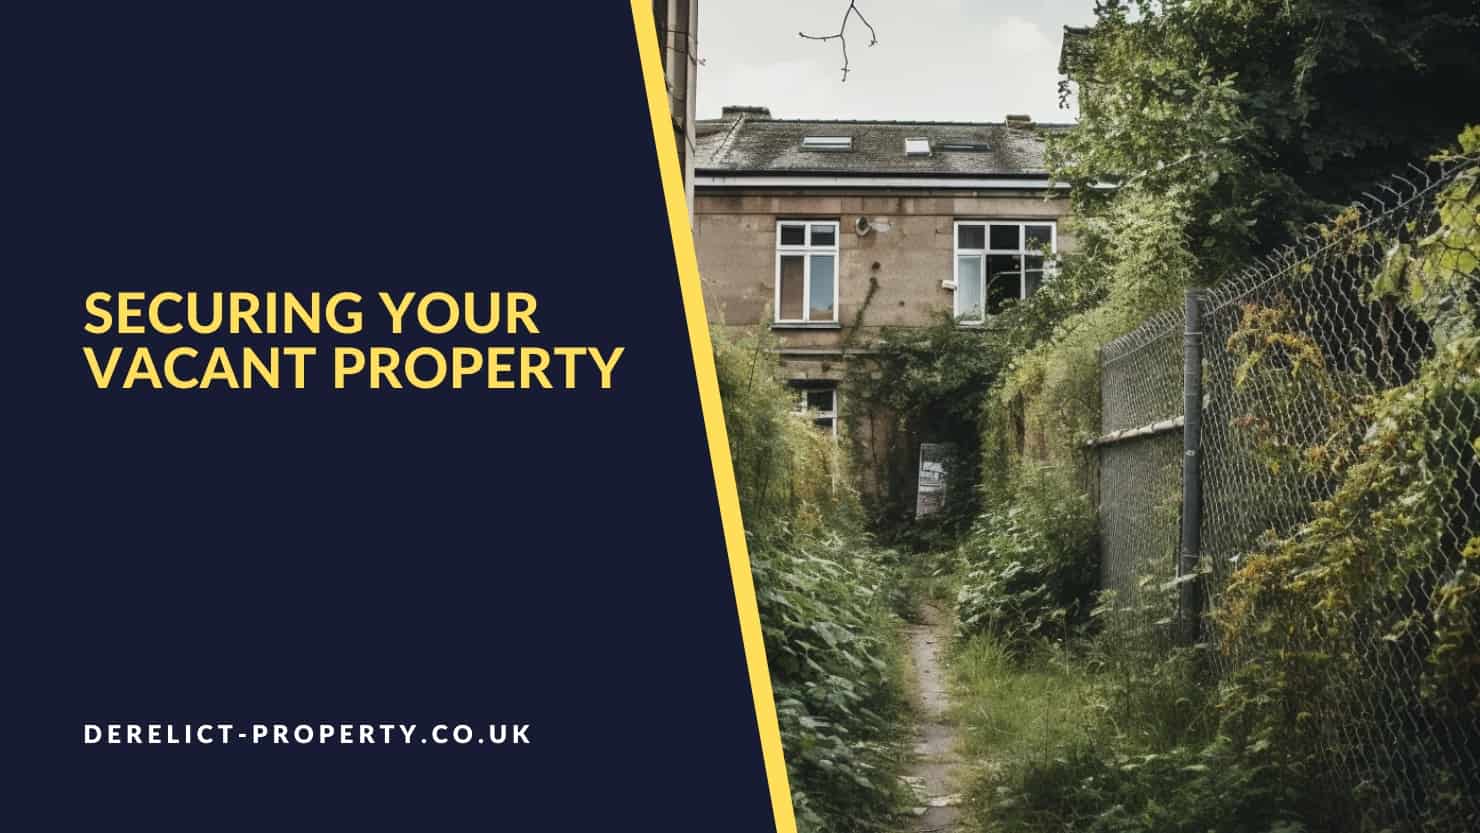 Securing your vacant property